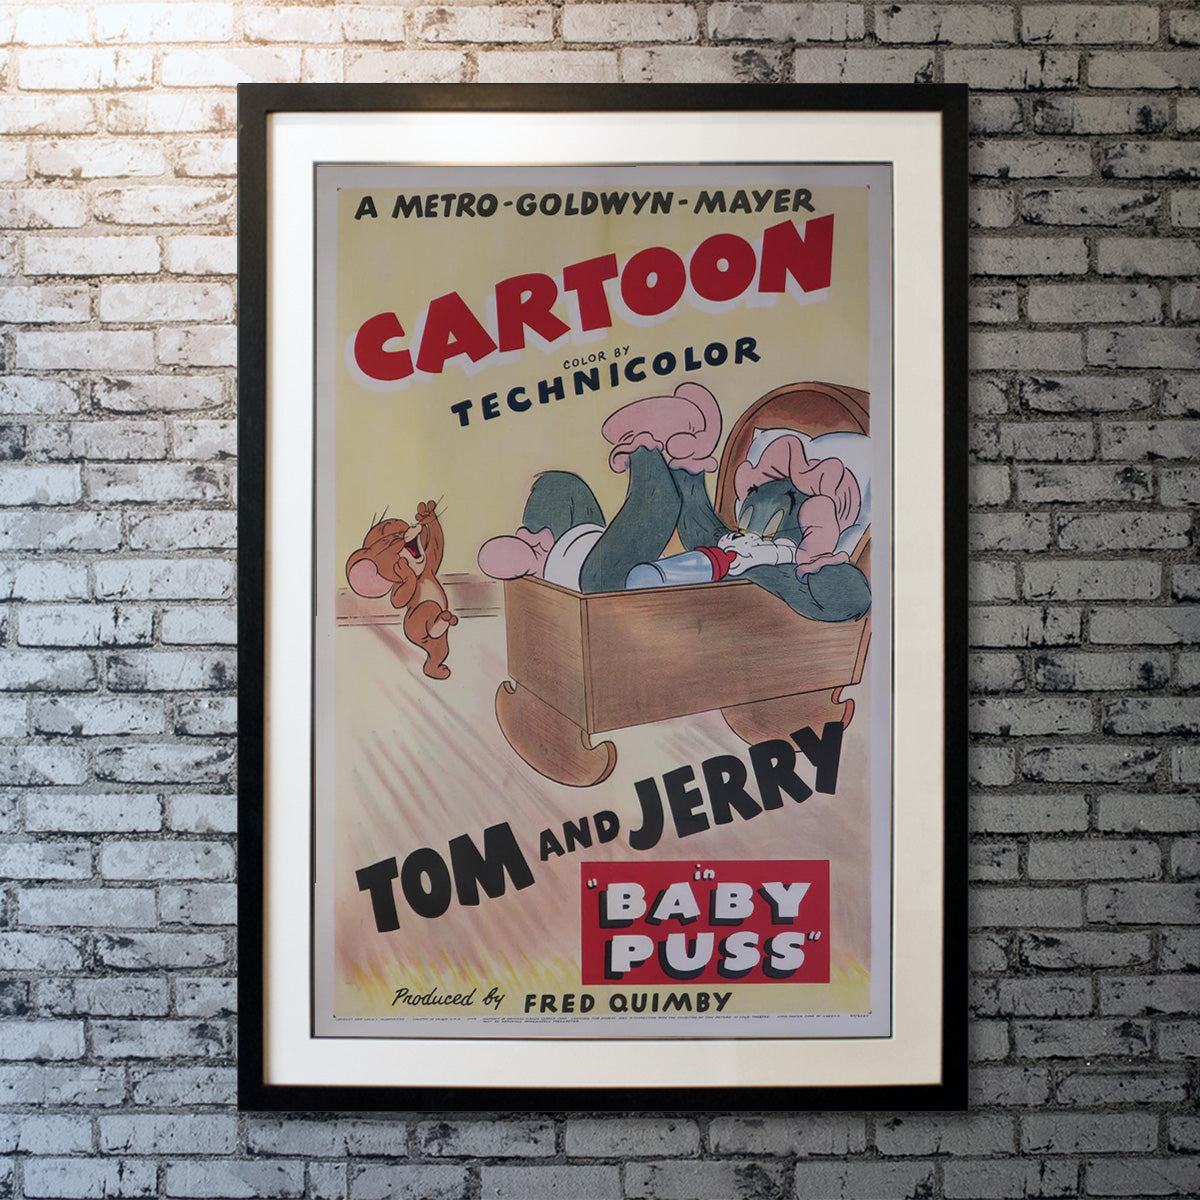 Tom And Jerry: In Baby Puss (R1949)